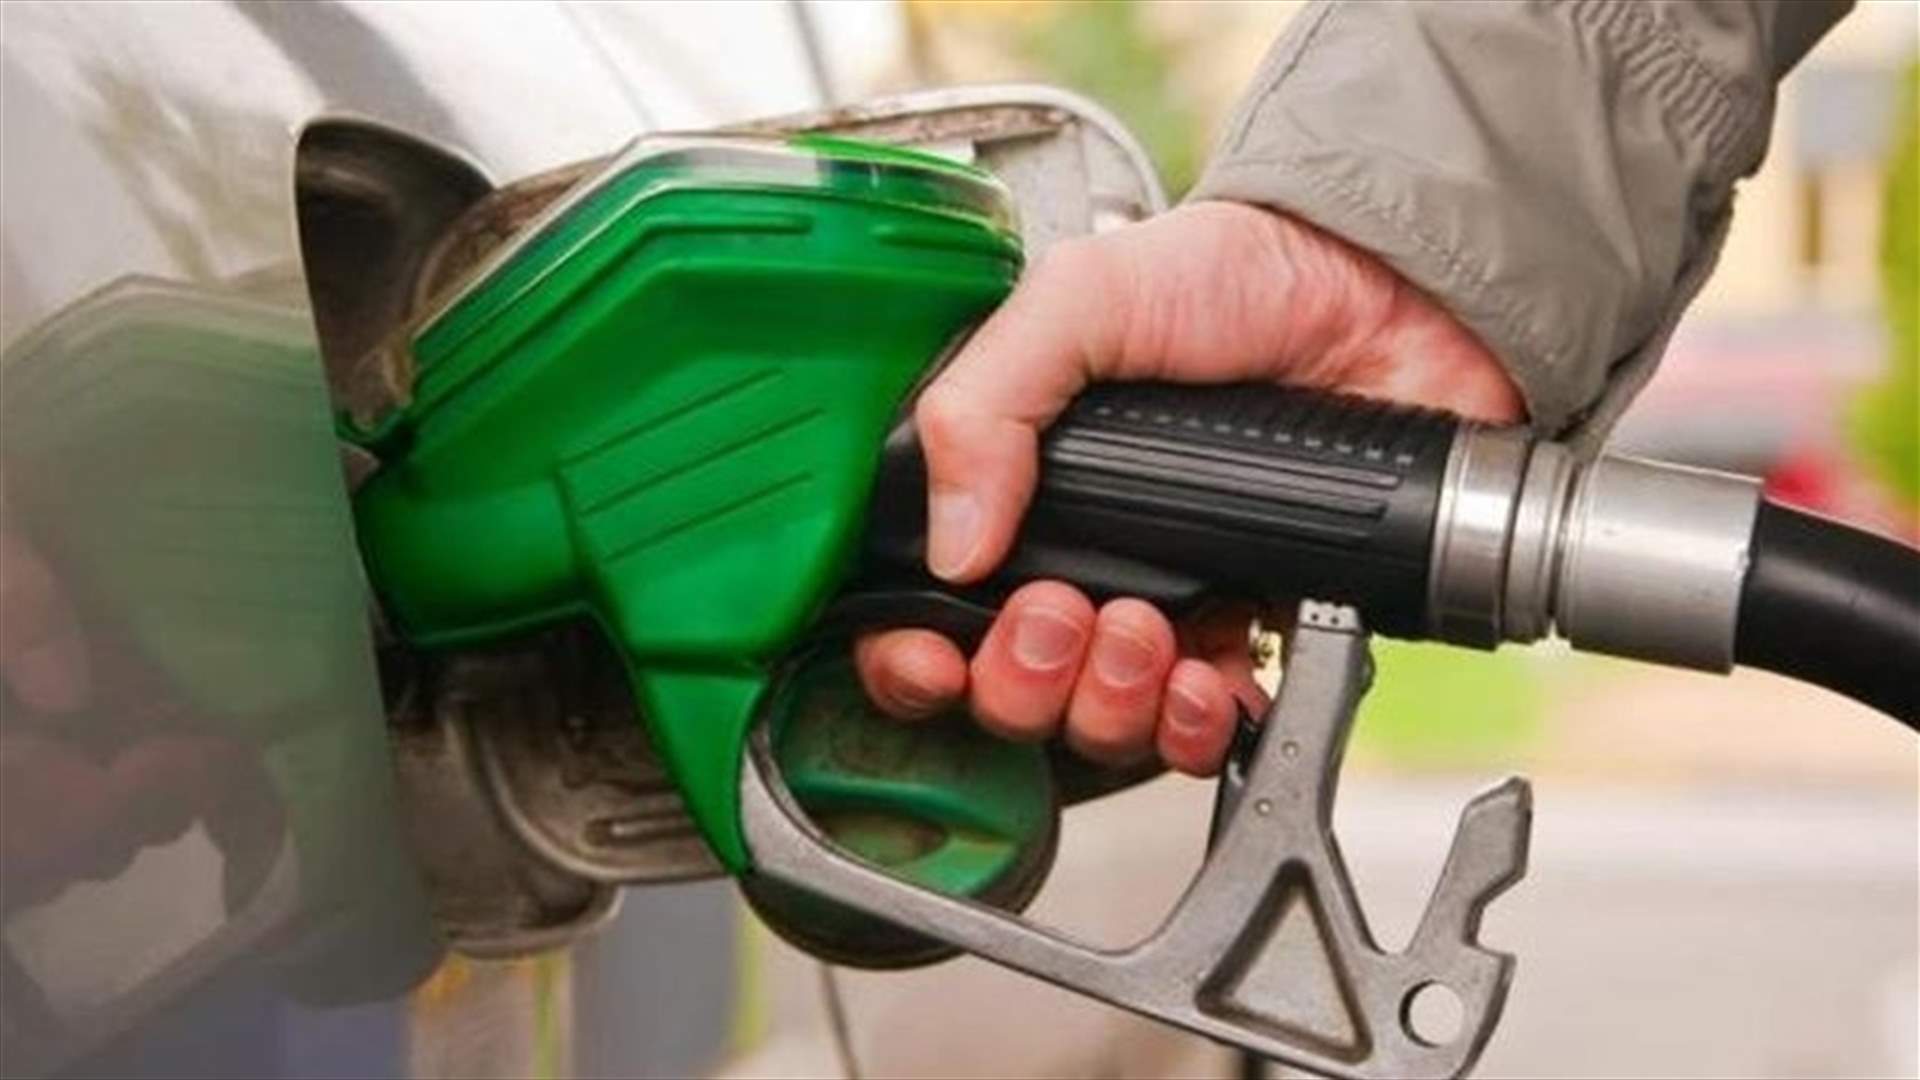 New increase hits fuel prices in Lebanon